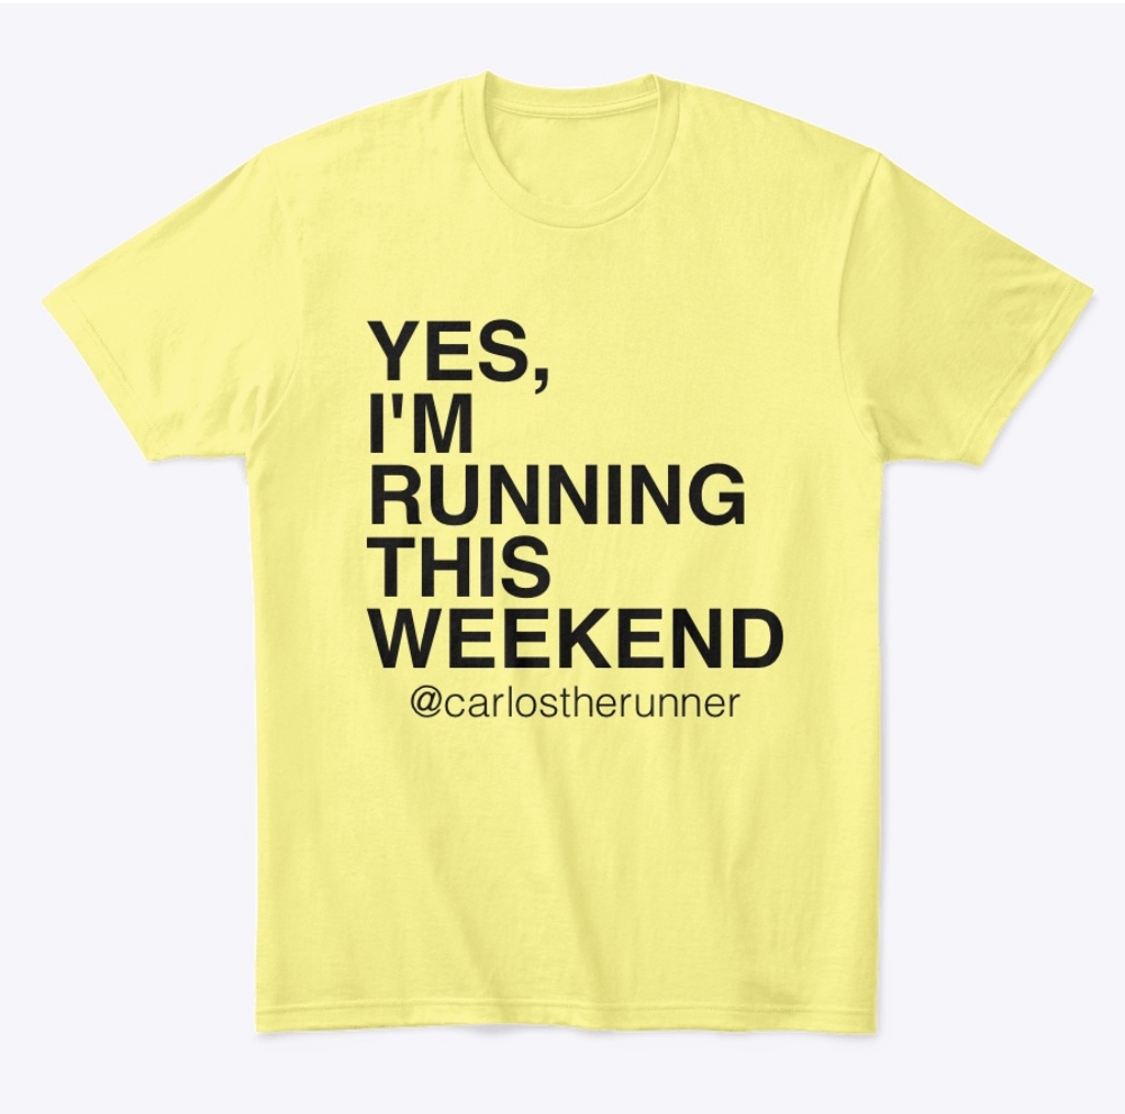 Yes, I'm Running This Weekend - Tee